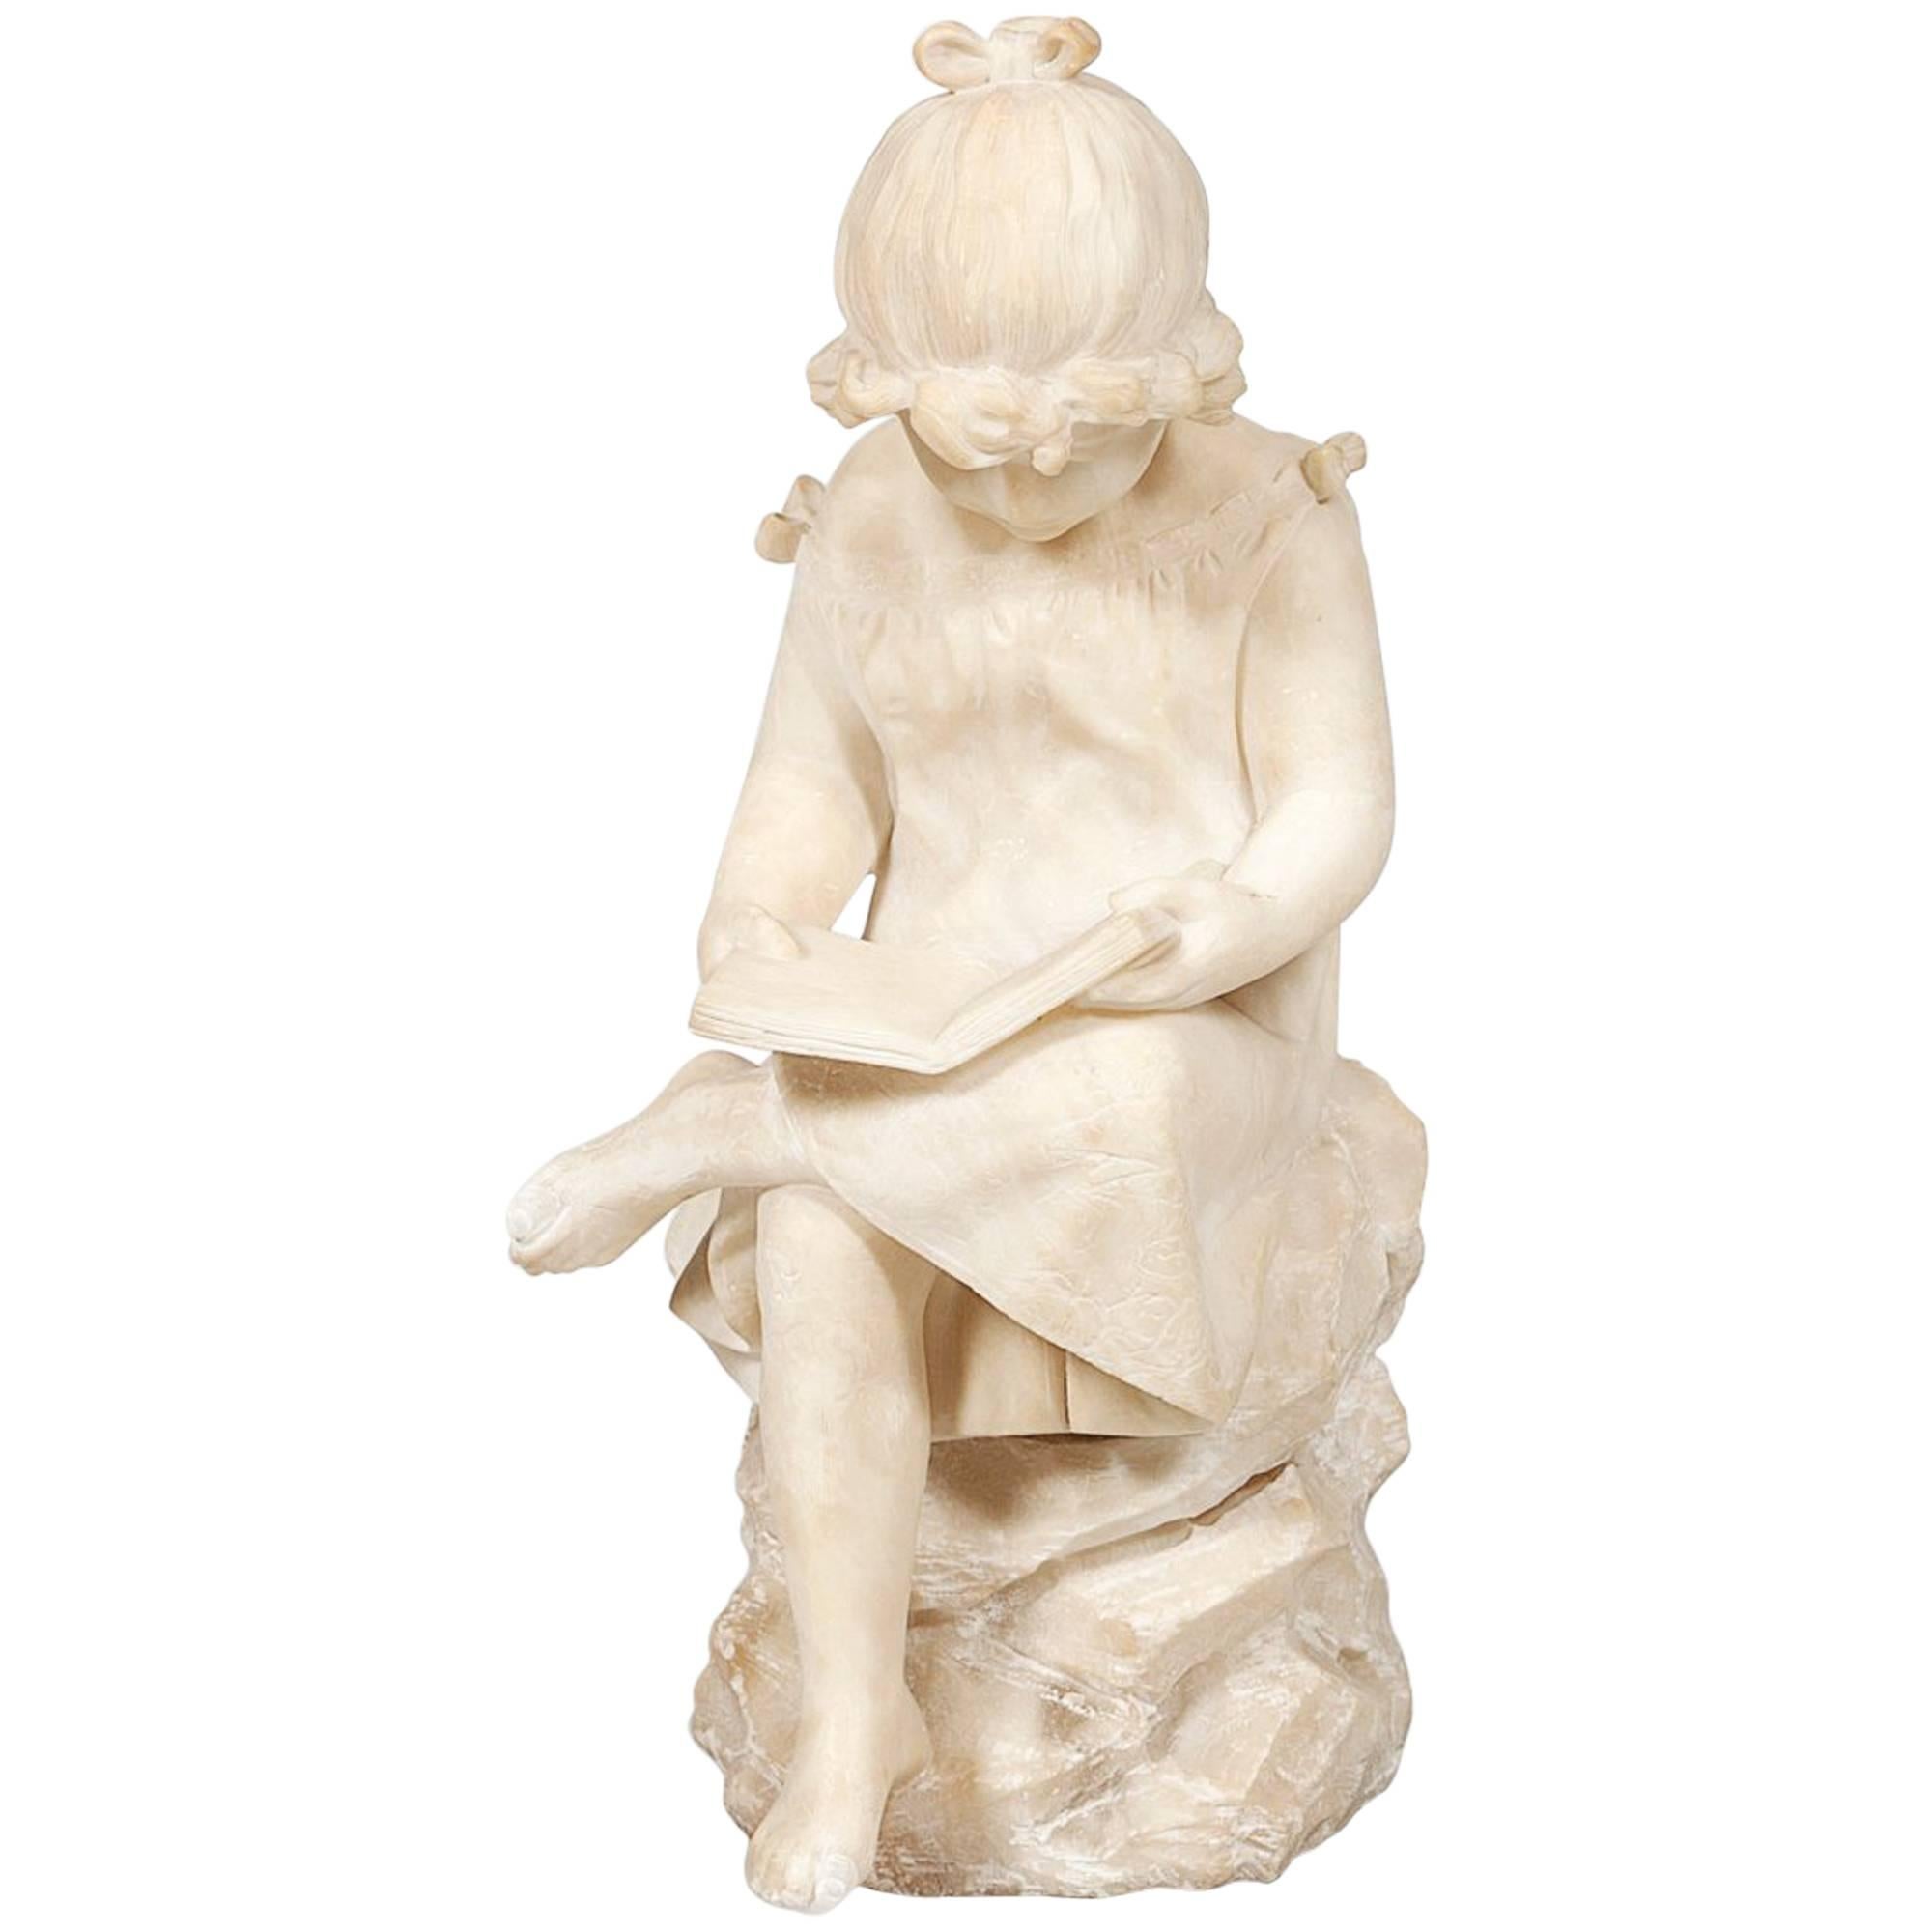 19th Century White Marble Statue of a Young Girl Sitting Reading